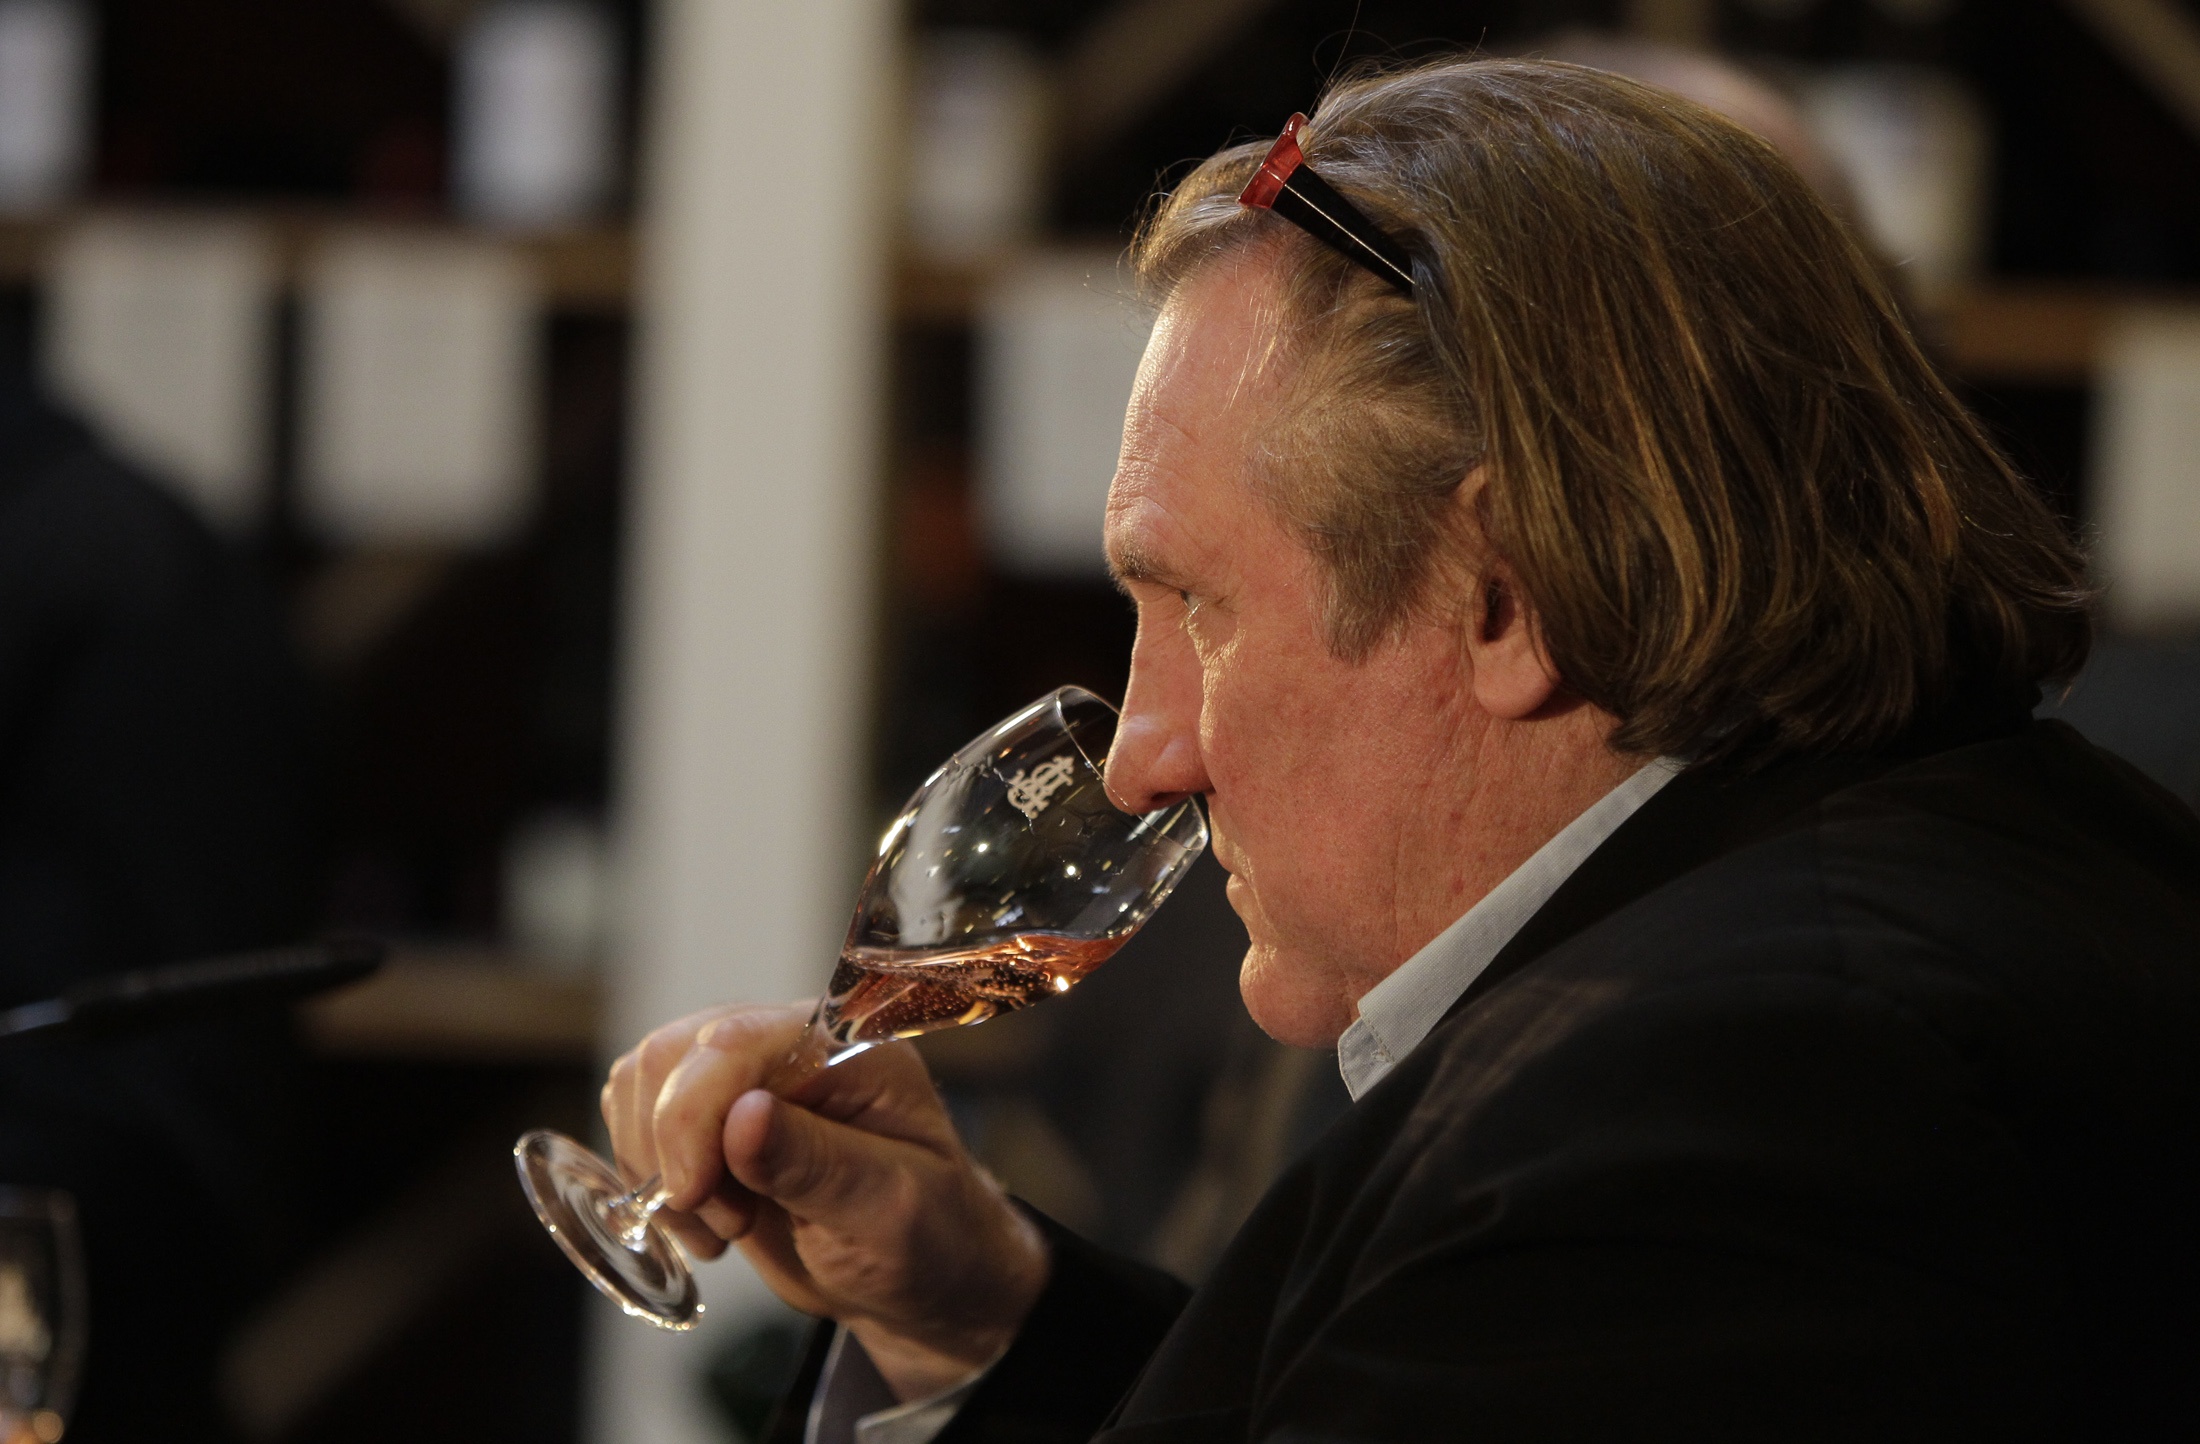 French actor Depardieu tastes his sparkling wine edition in Berlin